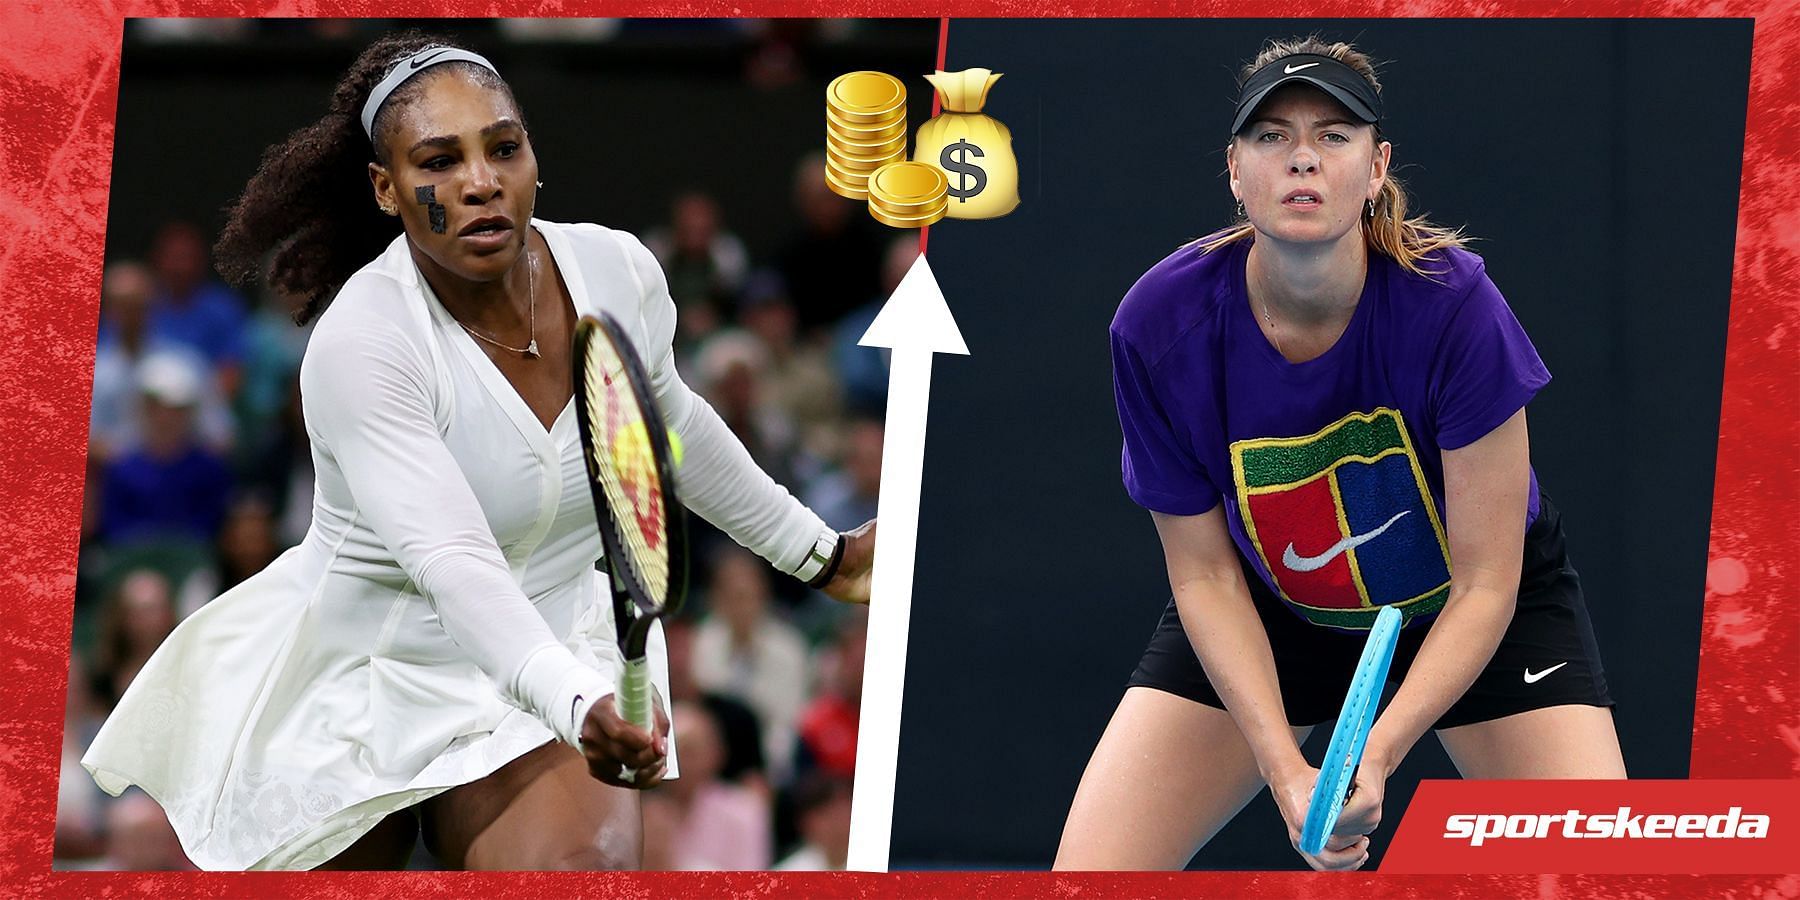 Top 5 career prize money leaders on the WTA tour ft. Serena Williams